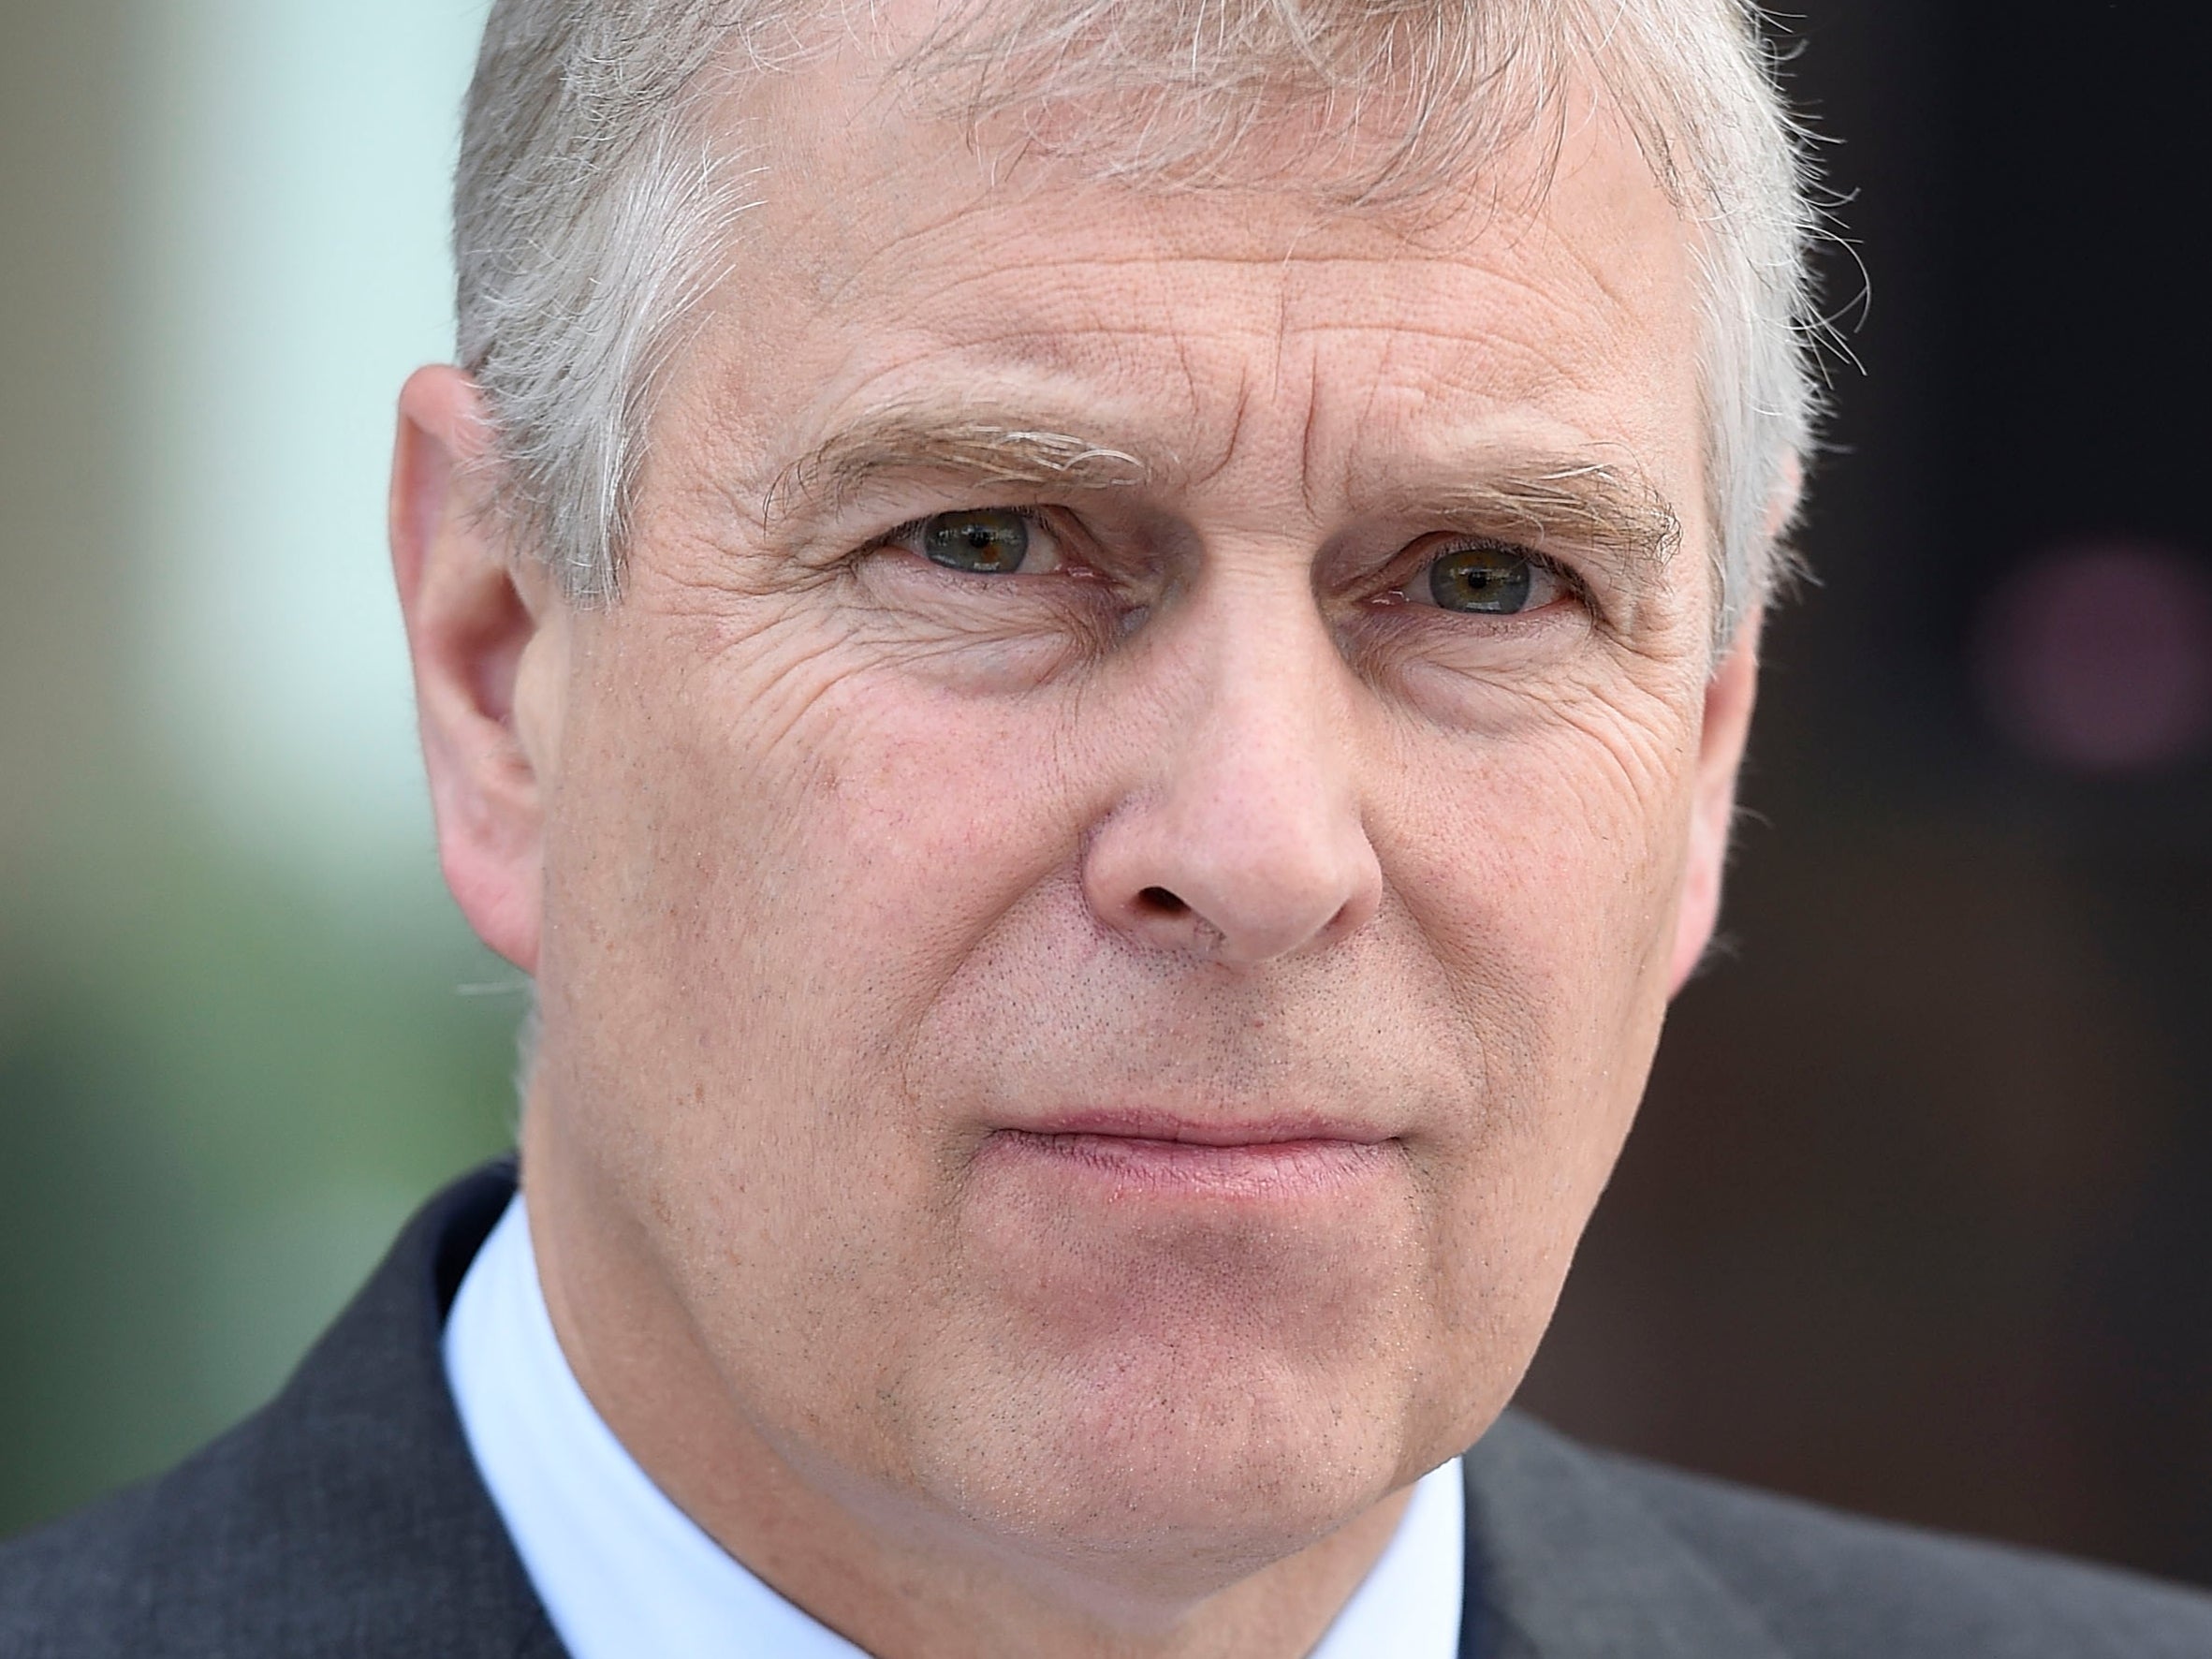 Prince Andrew participated in a ‘disastrous’ interview to discuss allegations against him in 2019